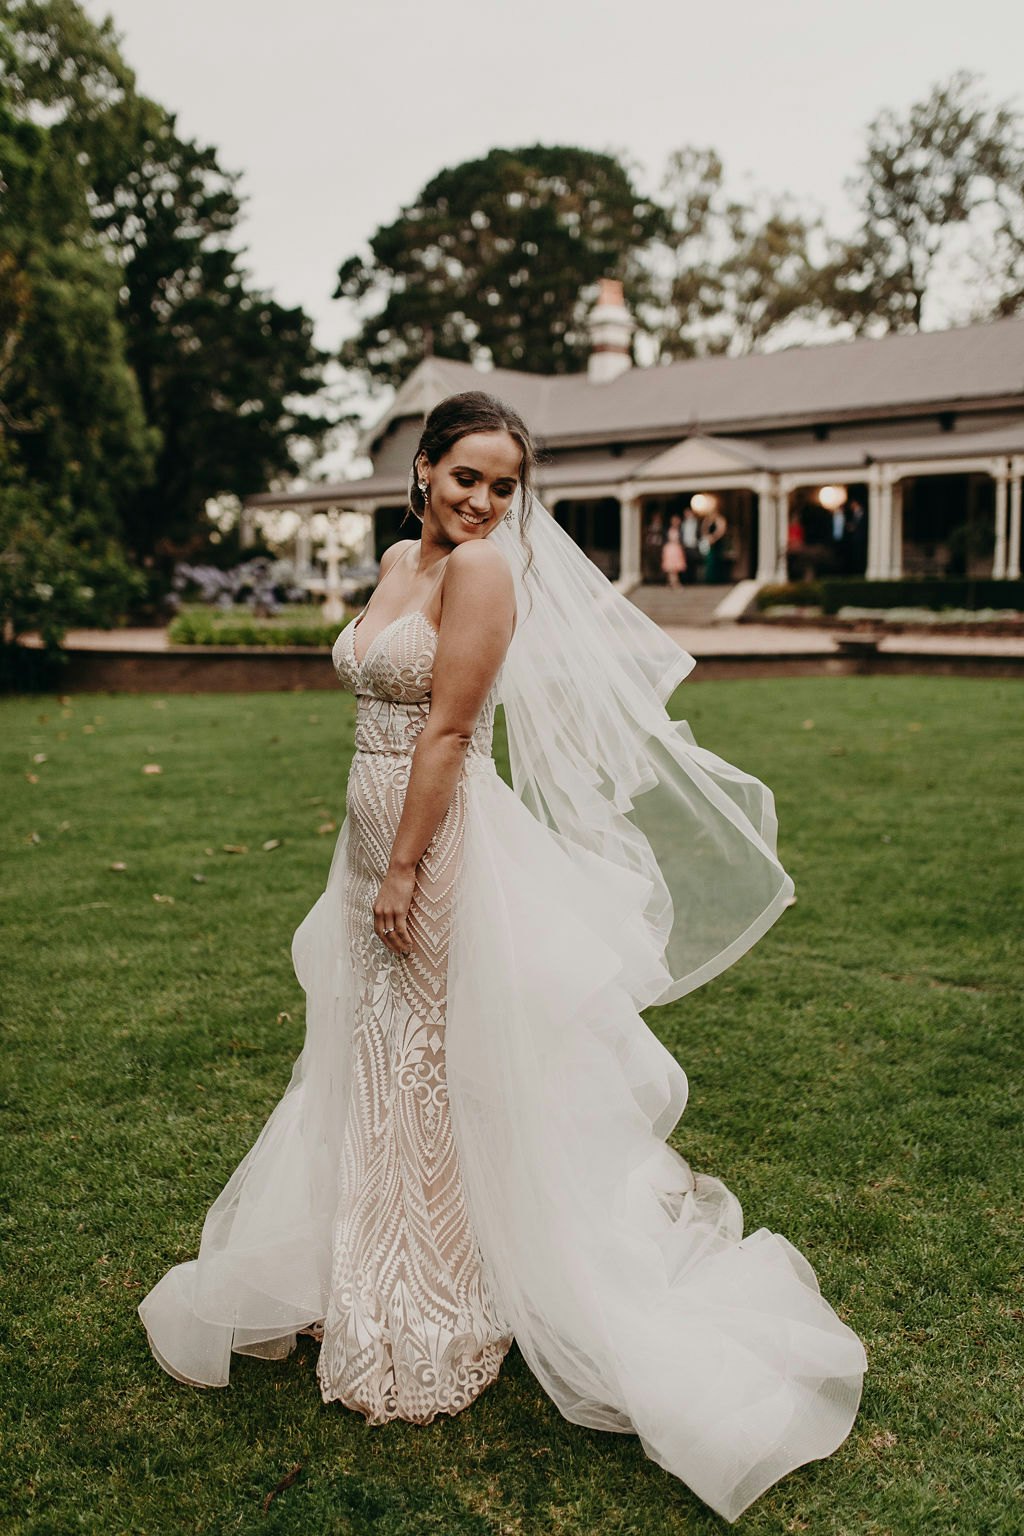 Bride twirling around in gown 